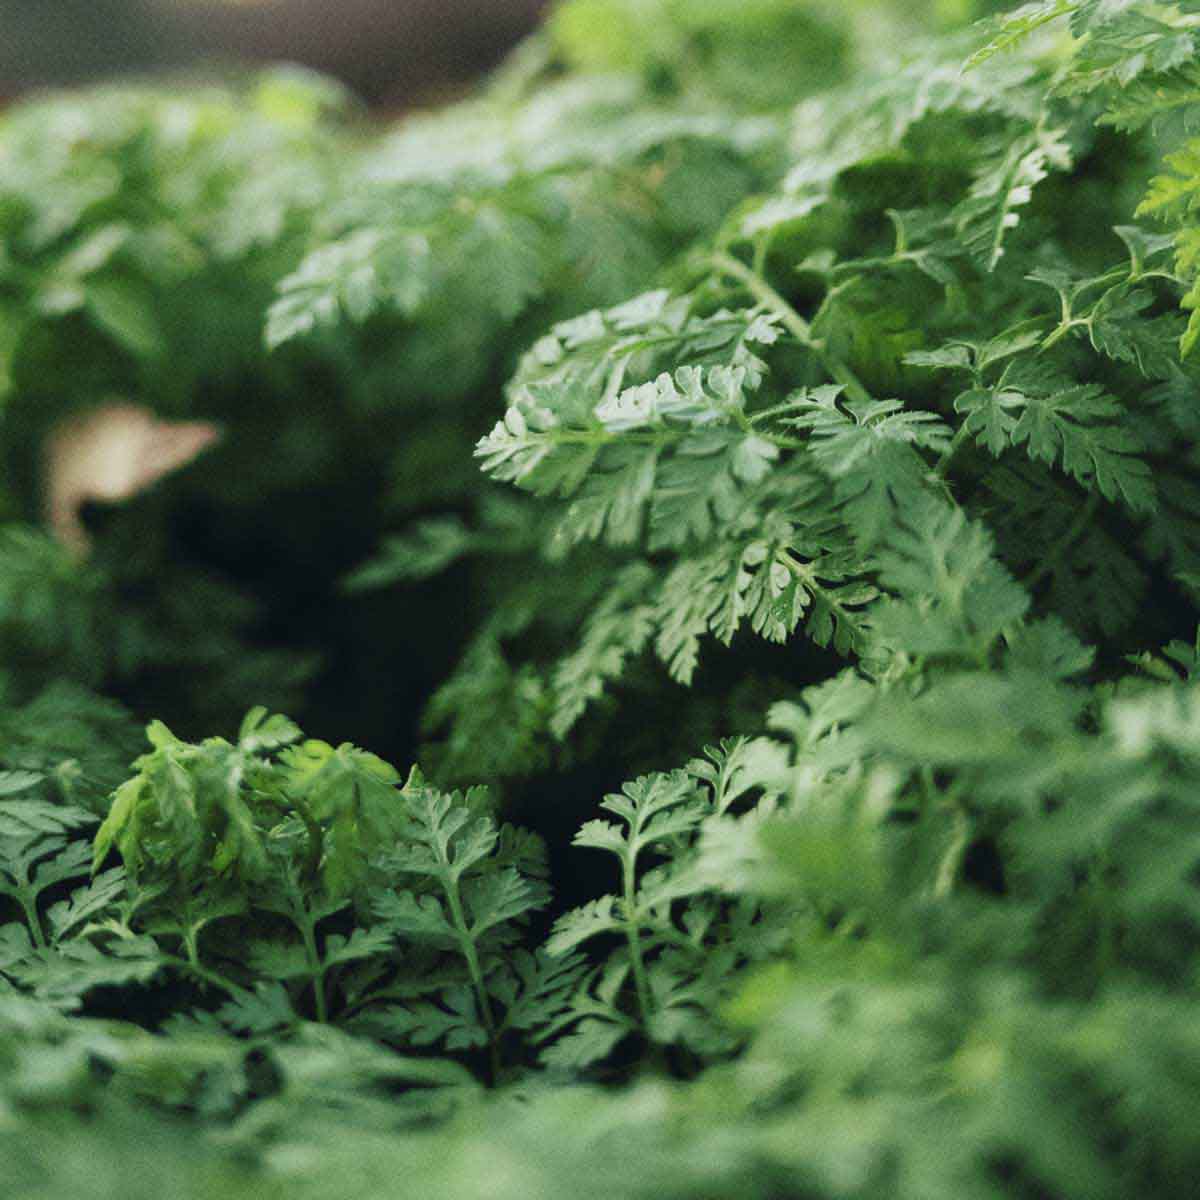 chervil leaves squished close together.